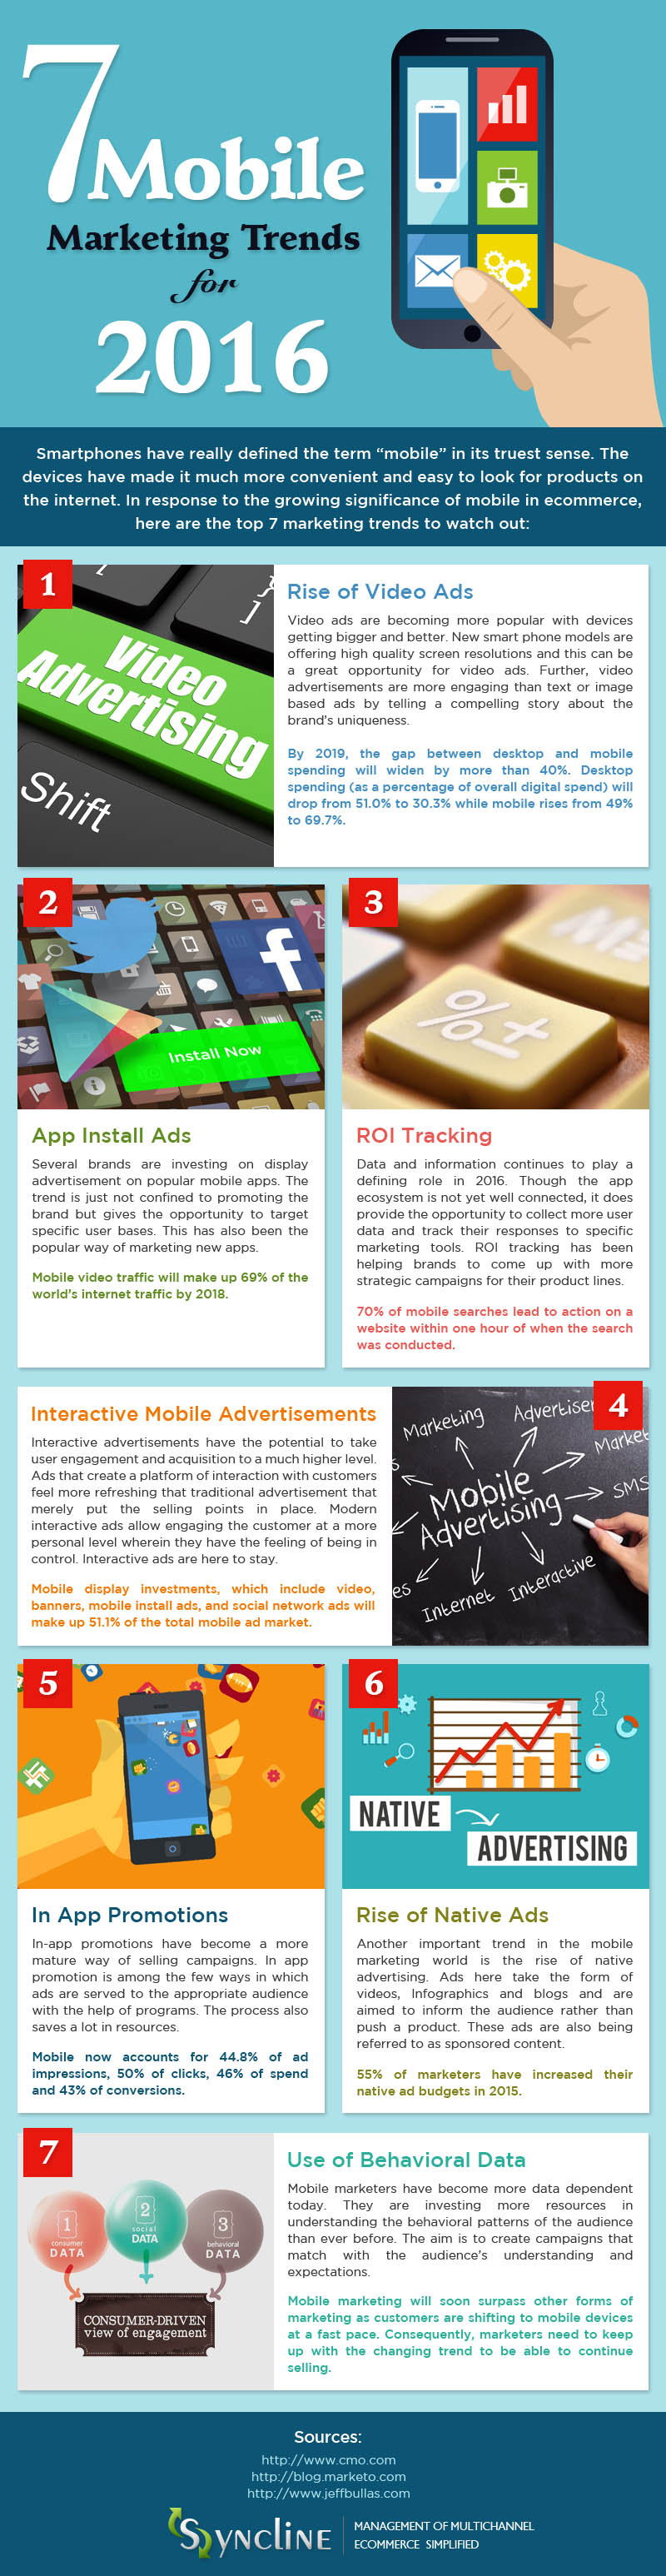 Mobile Marketing Trends for 2016 - Image 1